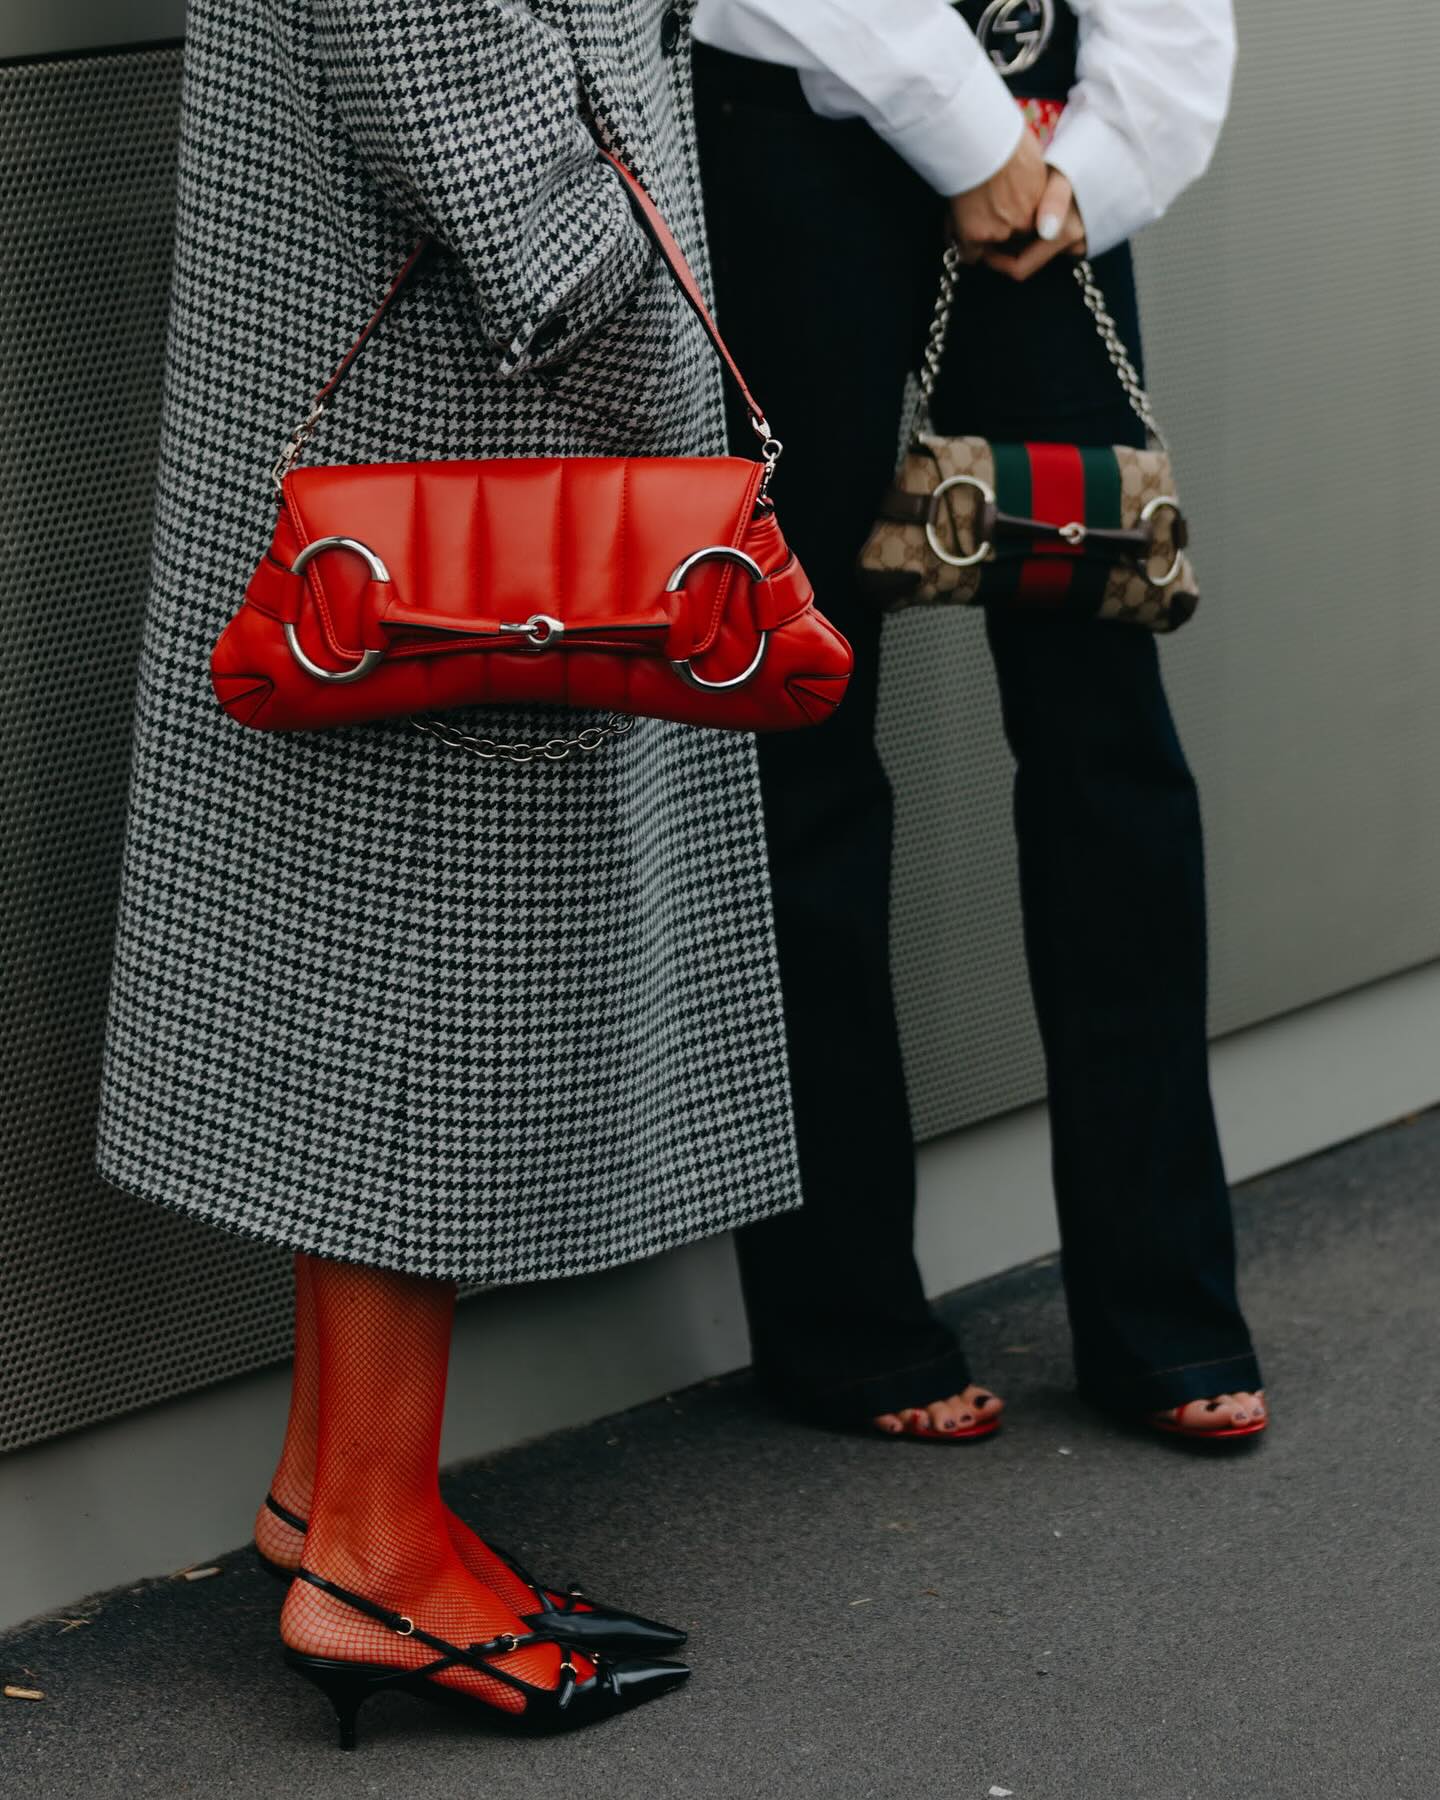 The Minimalist Gucci Bag Celebs and Vogue Editors Can't Stop Wearing